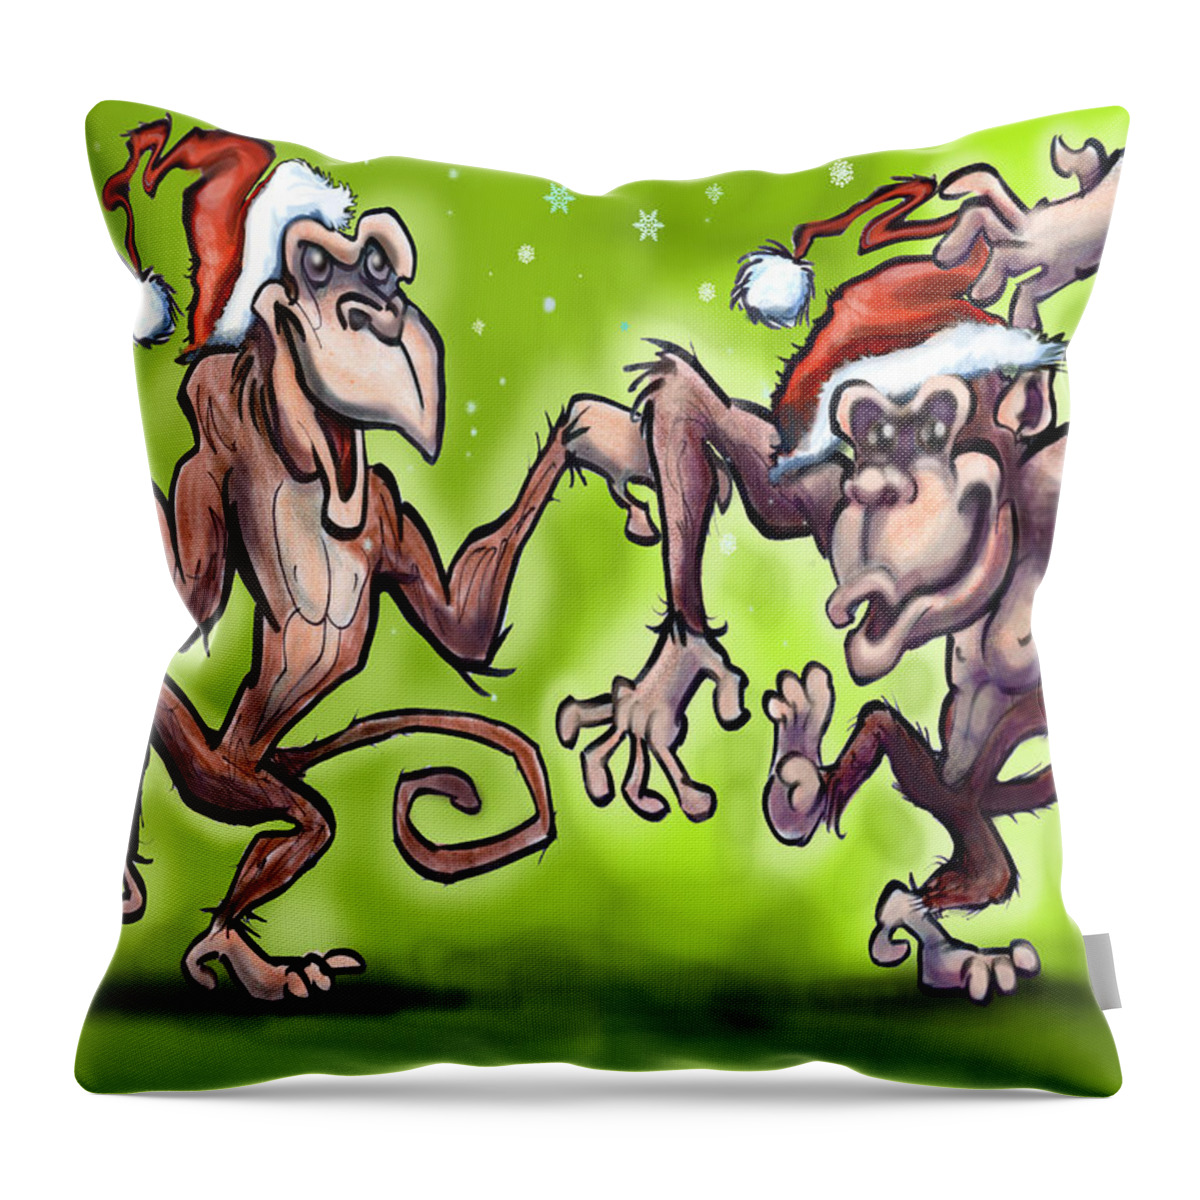 Christmas Throw Pillow featuring the painting Christmas Monkeys by Kevin Middleton